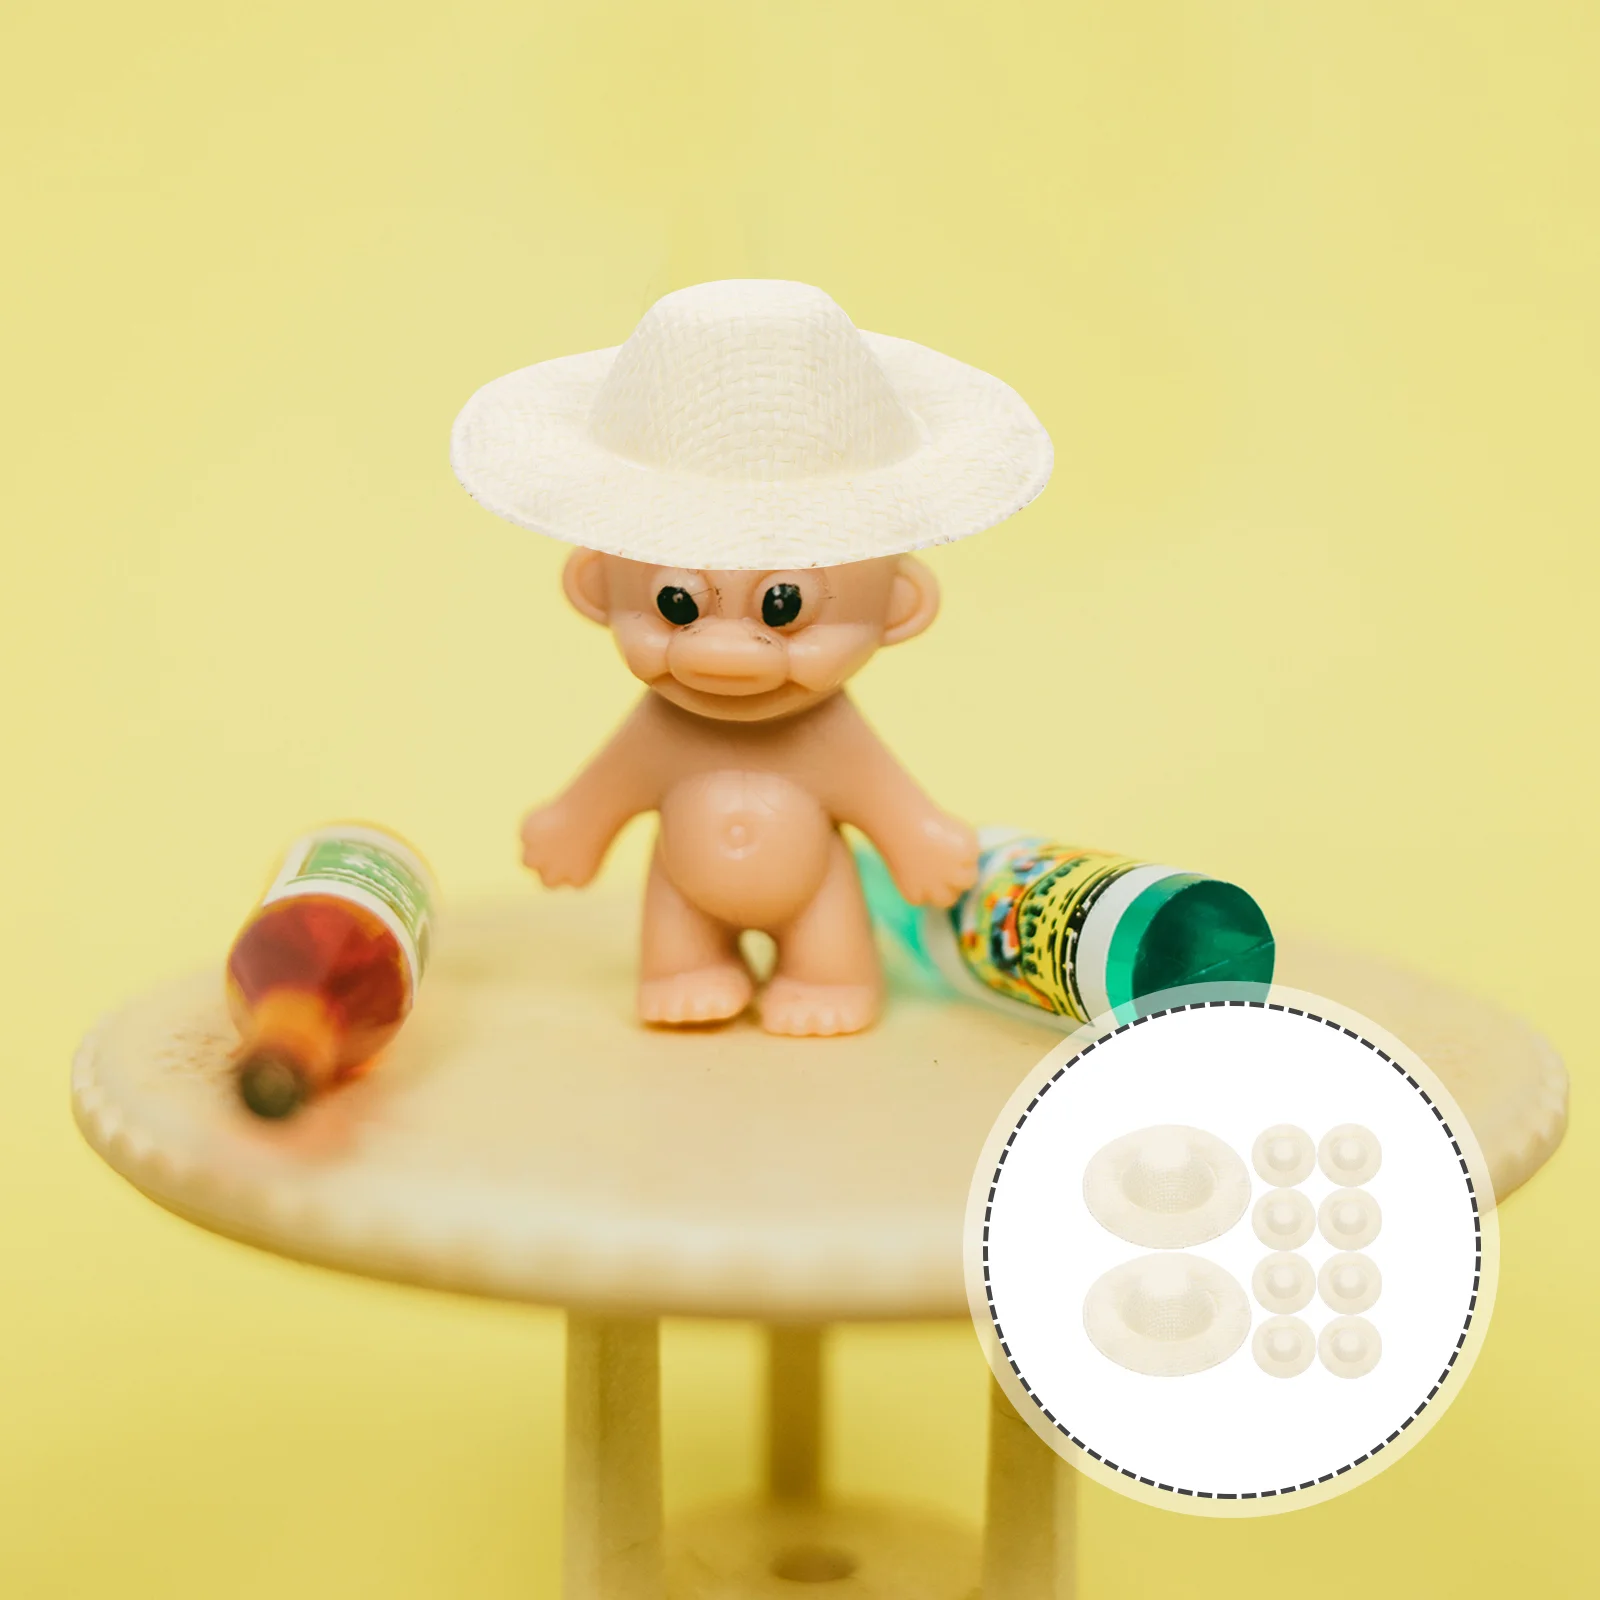 

Miniature Doll Hats Straw Hats Tiny Woven Hats Miniature Straw Hats Doll Accessories Cloth Baby Knitted Hat